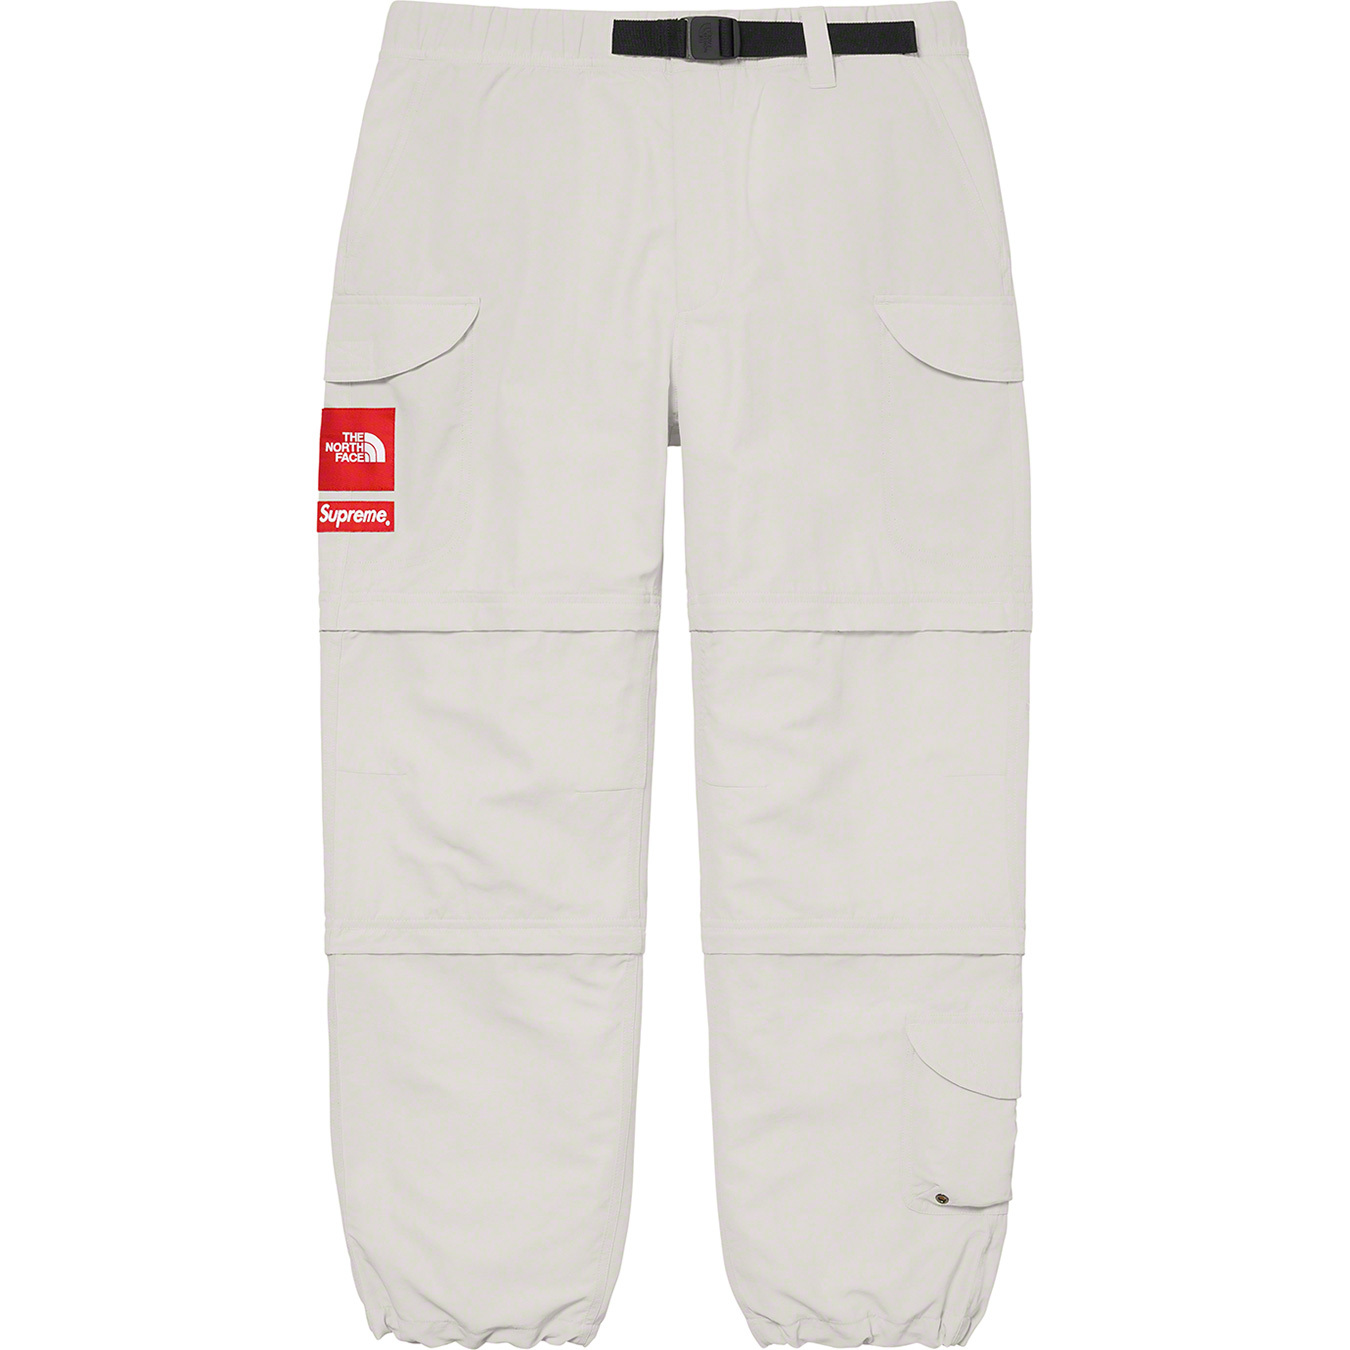 Supreme / The North Face TrekkingZip-Offブラックサイズ